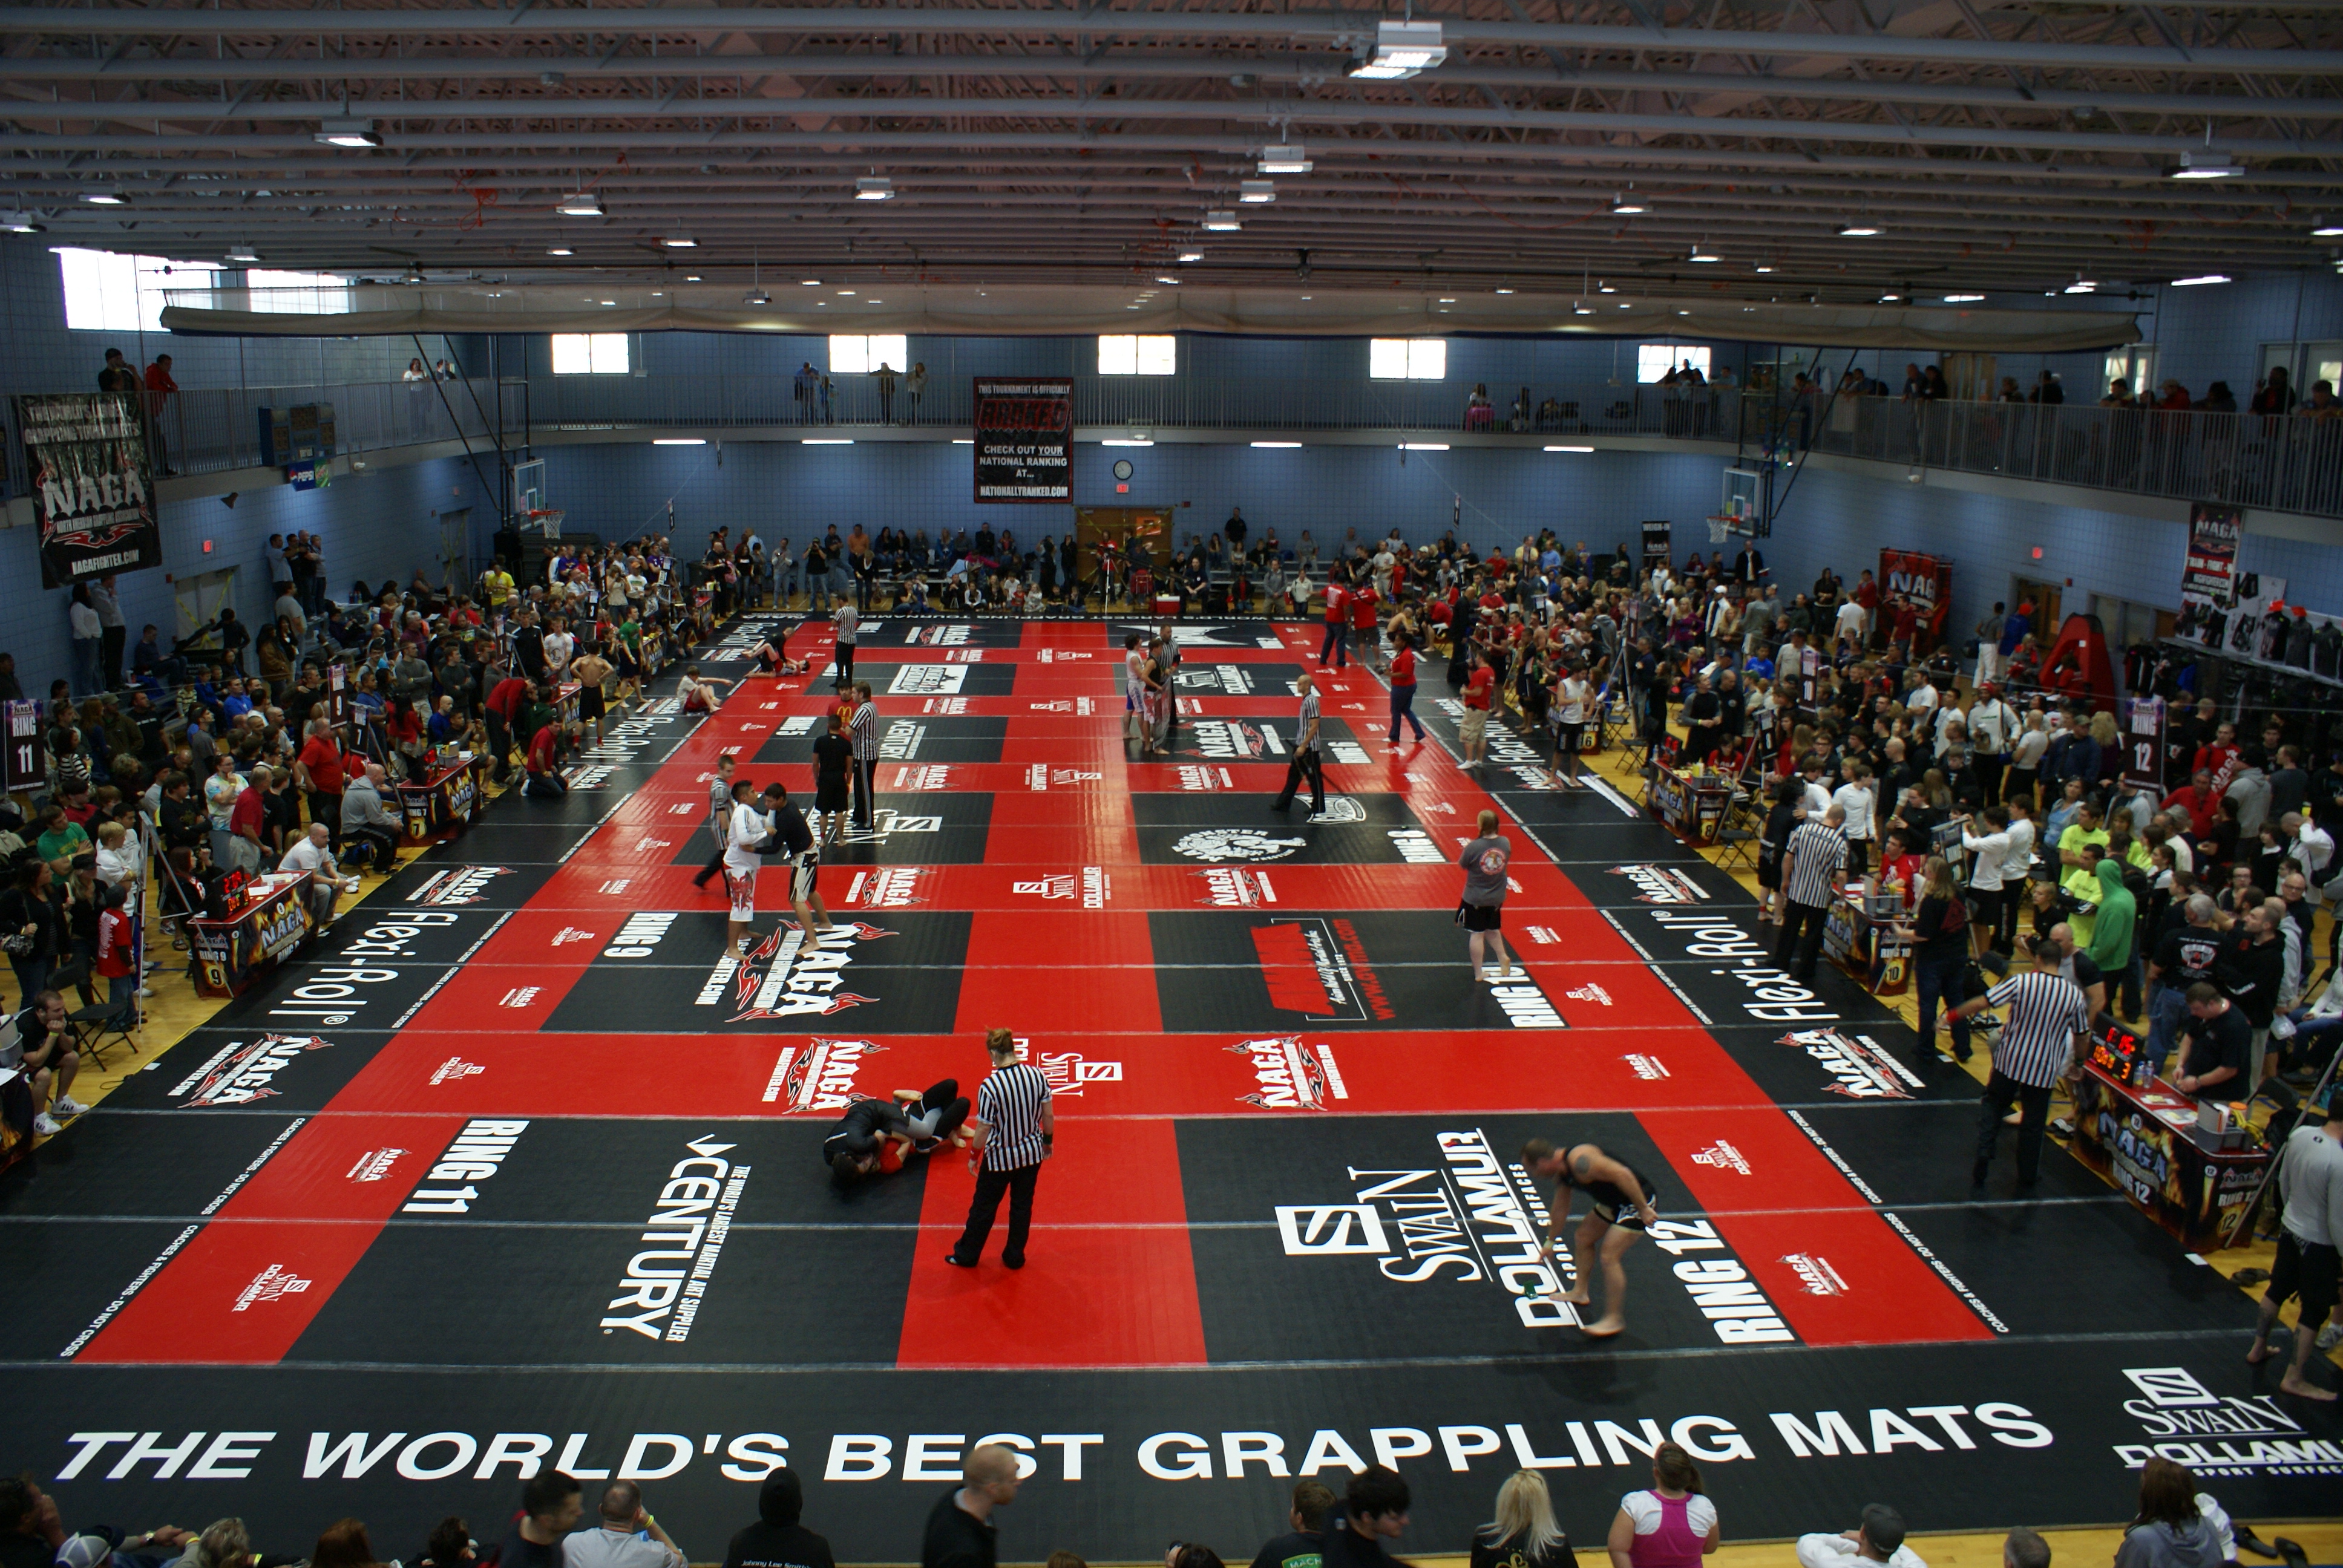 Report: Naga Grappling Made $4 Million in 2015